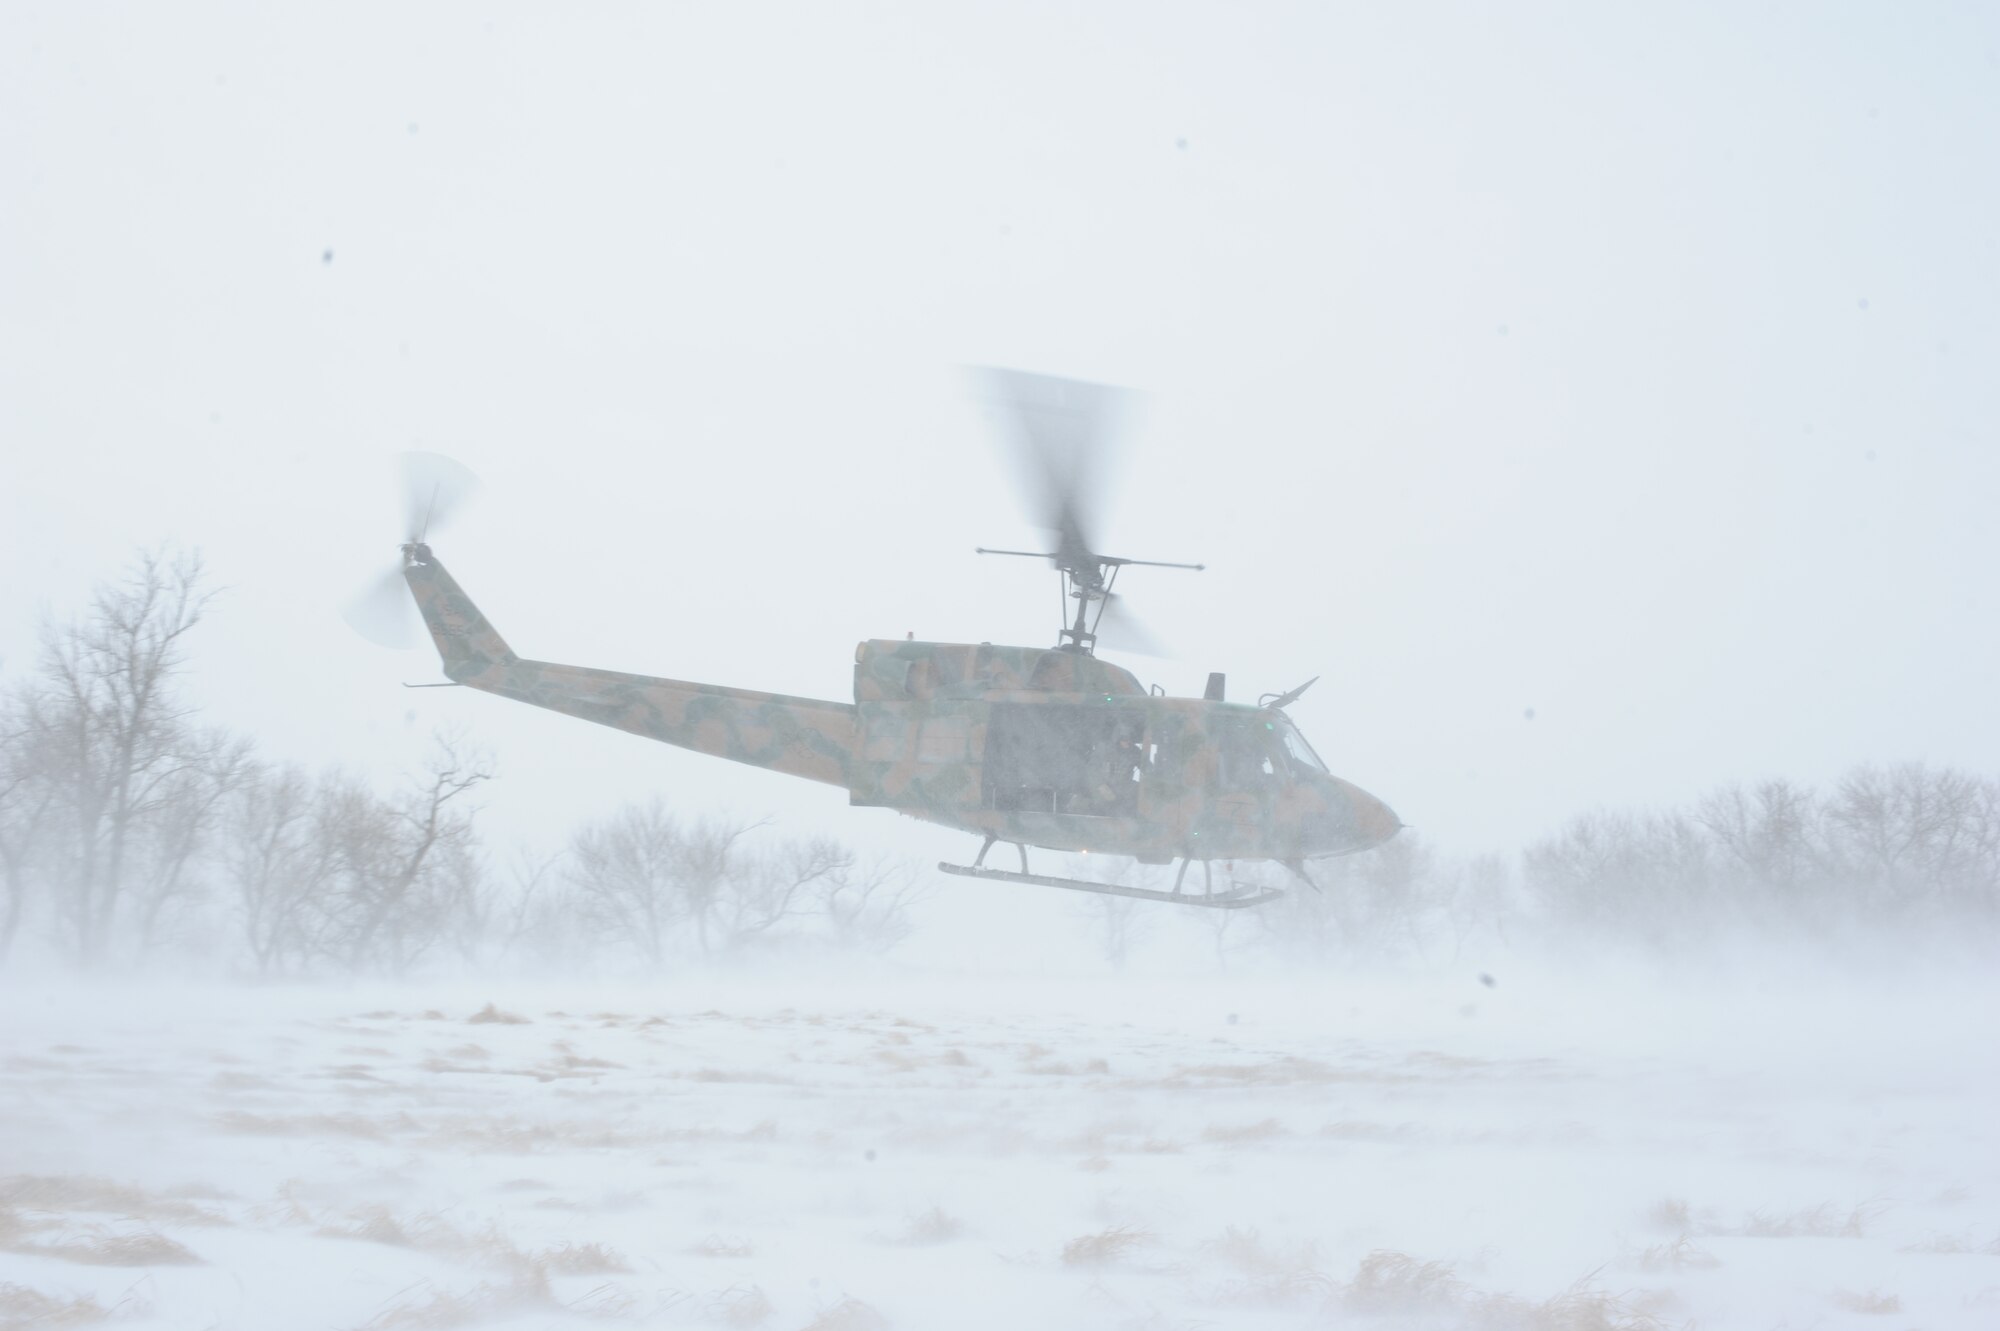 A UH1-N helicopter takes off near a stand of trees during a training mission near Minot Air Force Base, N.D., Feb. 11, 2015. During the training, the crew accounted for blowing snow and extreme low temperatures as they tested their search and rescue skills. (U.S. Air Force photos/Senior Airman Stephanie Morris)